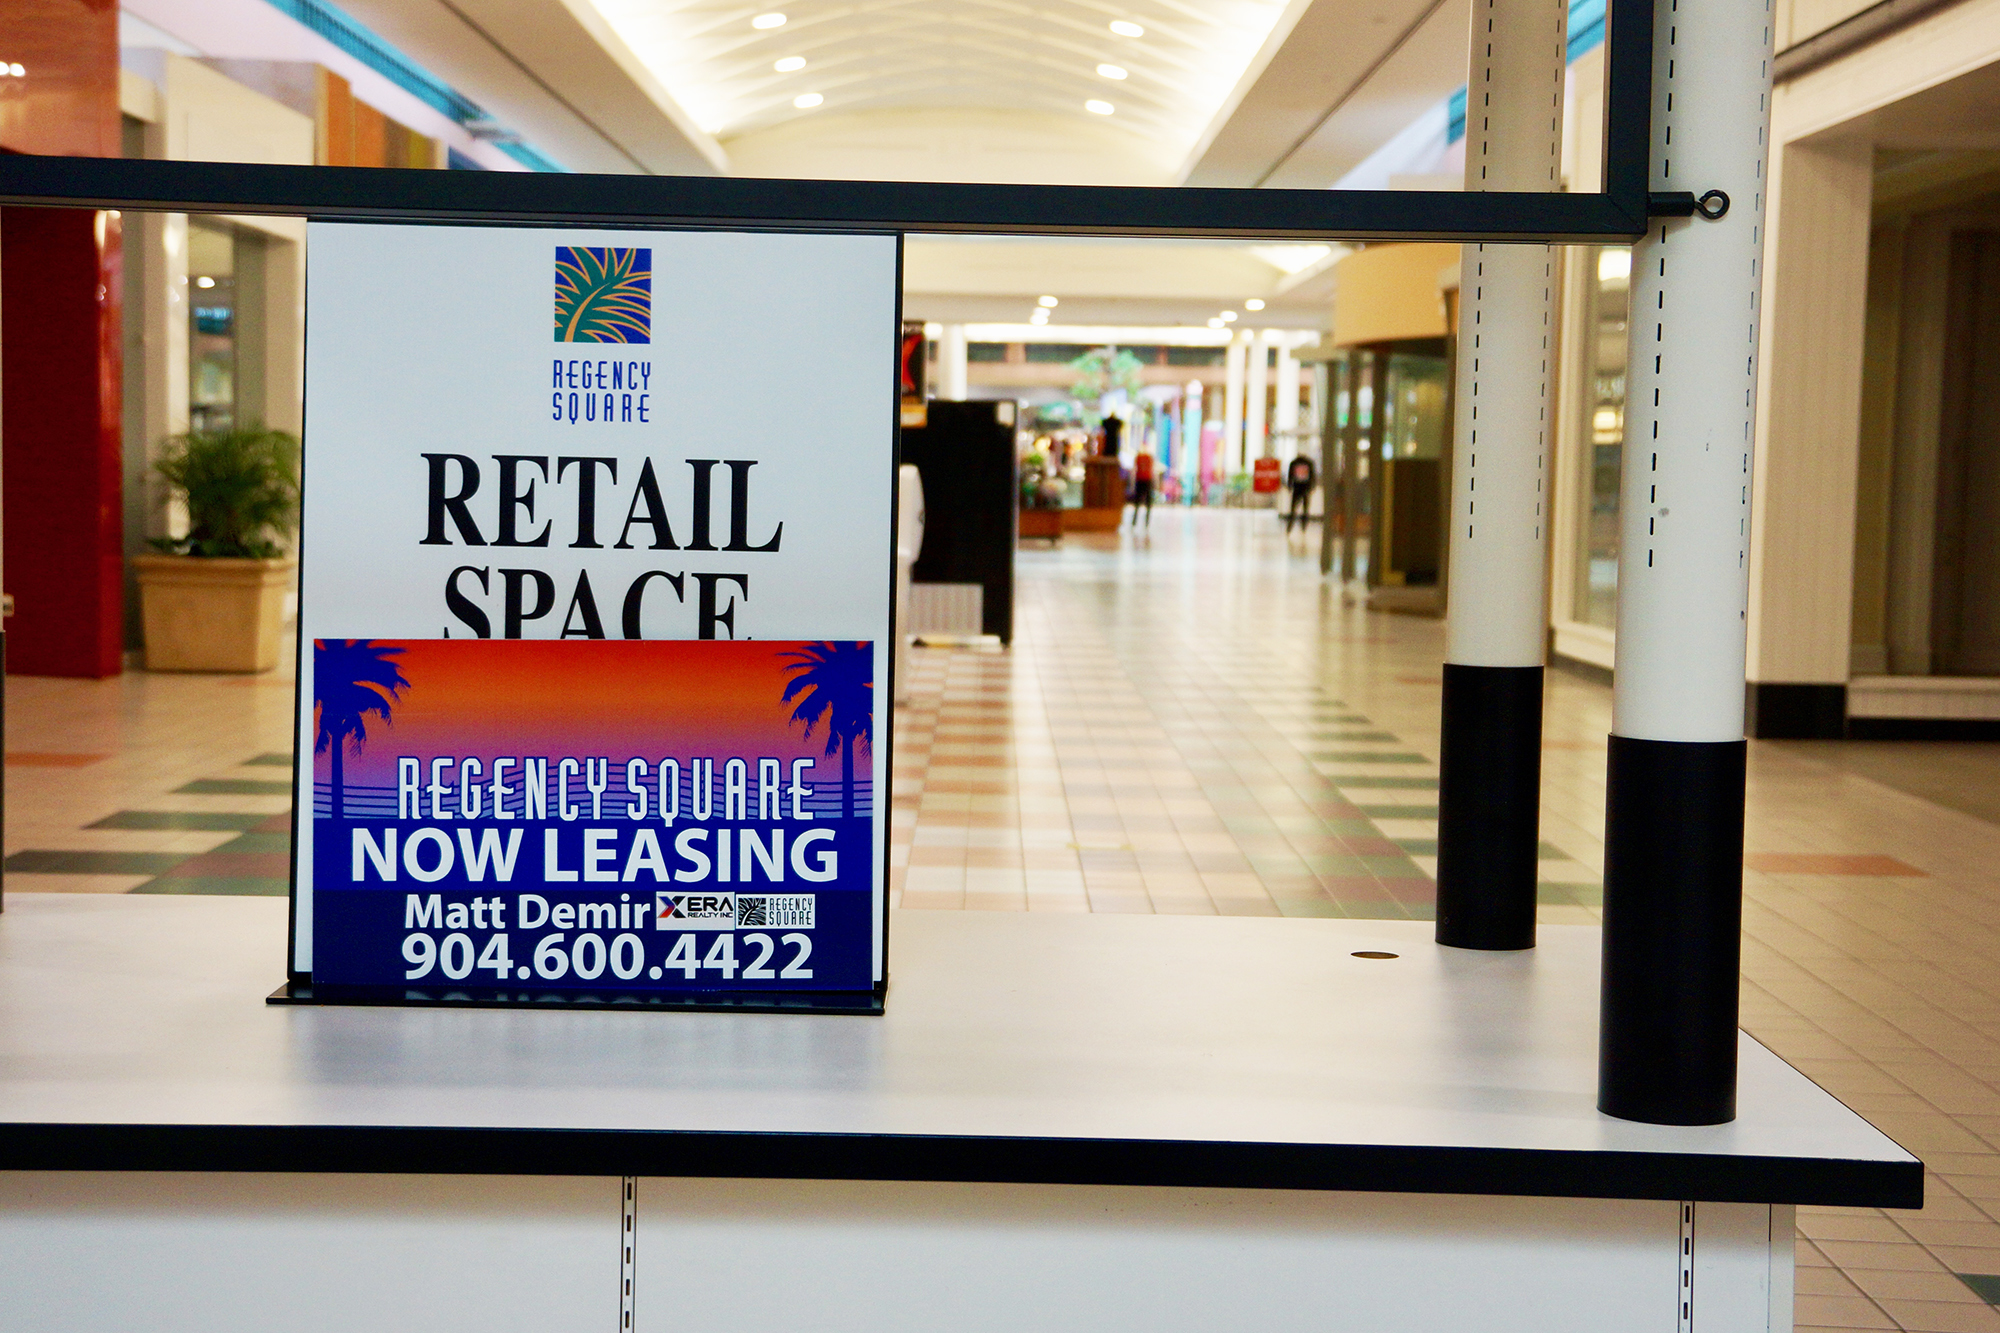 Murphy Land and Retail Services is working to fill the spaces inside Regency Square Mall.